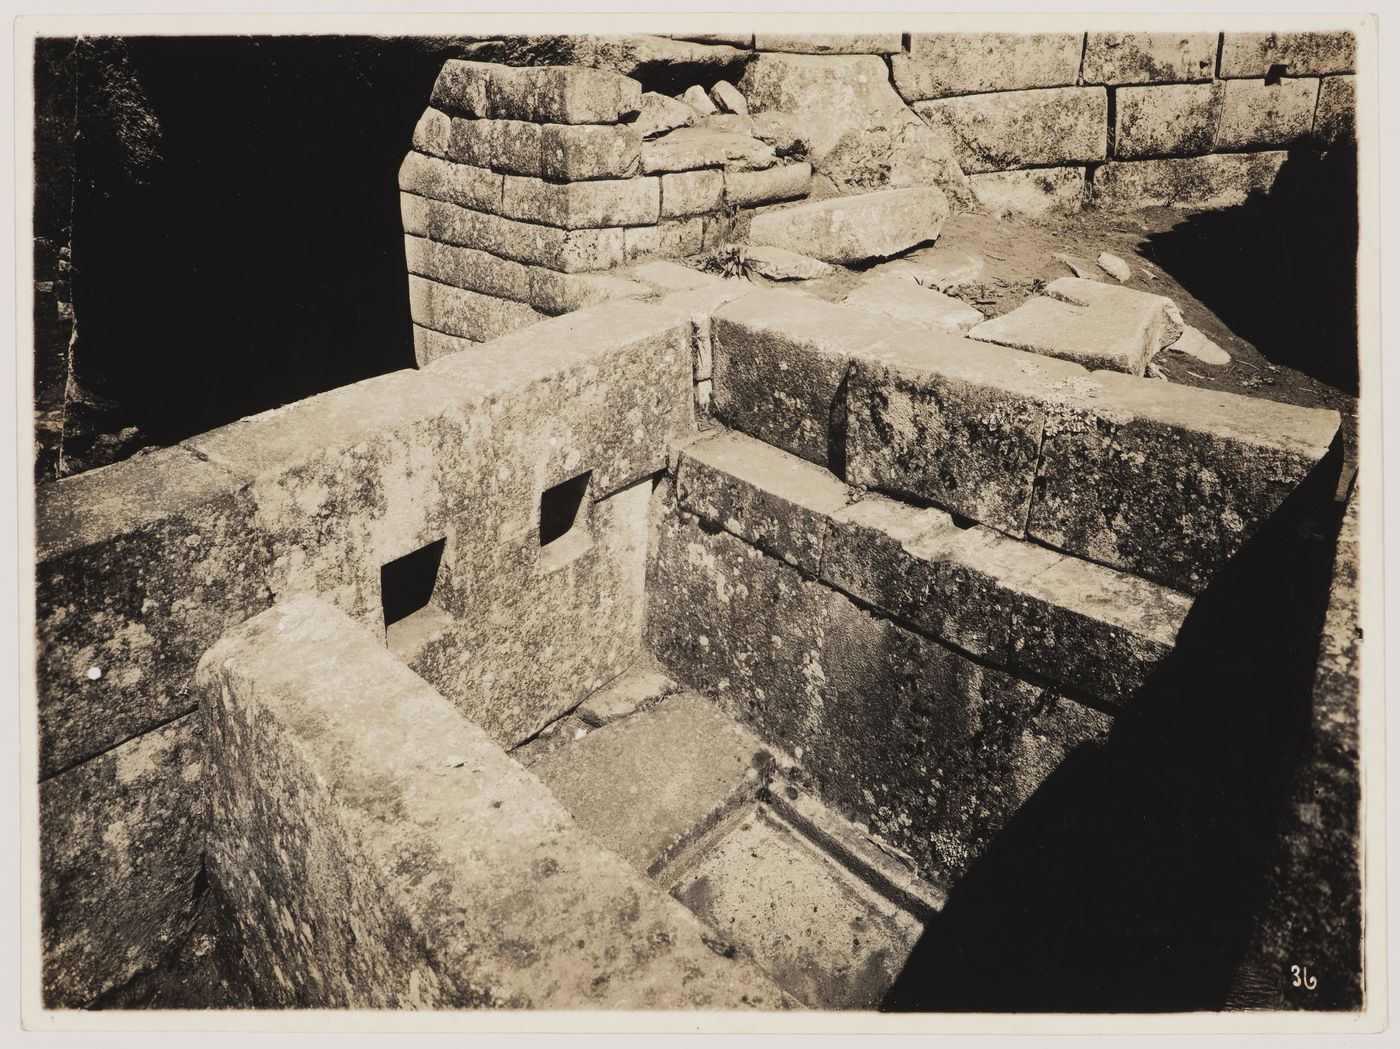 View of the principal liturgical bath with the lower portion of the Serpent Gate in the background, Machu Picchu, Peru